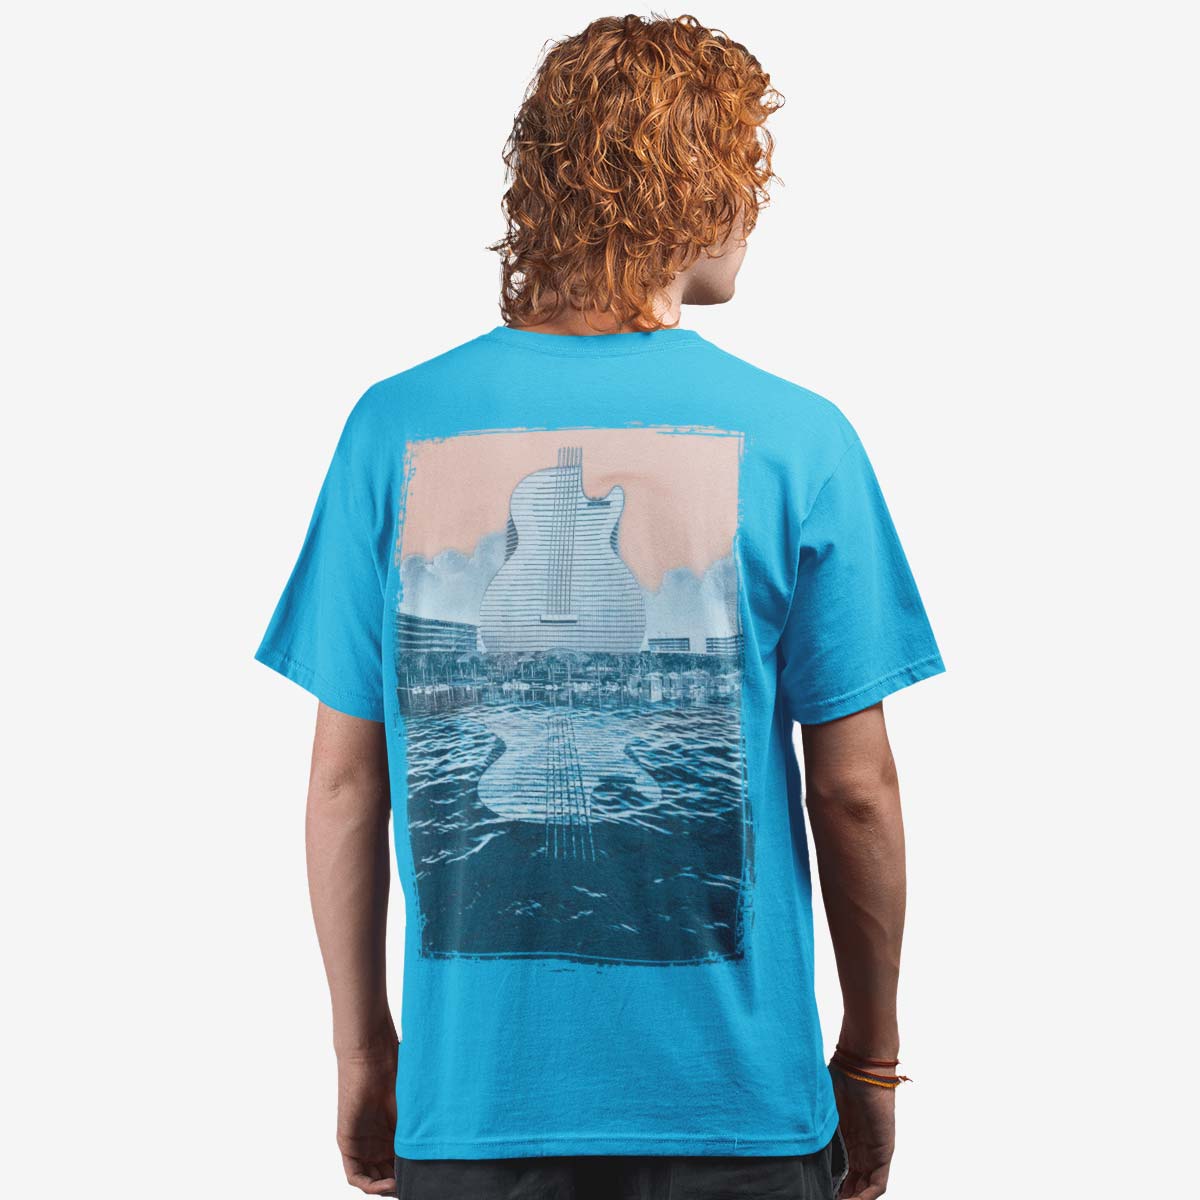 Guitar Hotel Adult Fit Tee in Aqua with Reflection Design image number 6